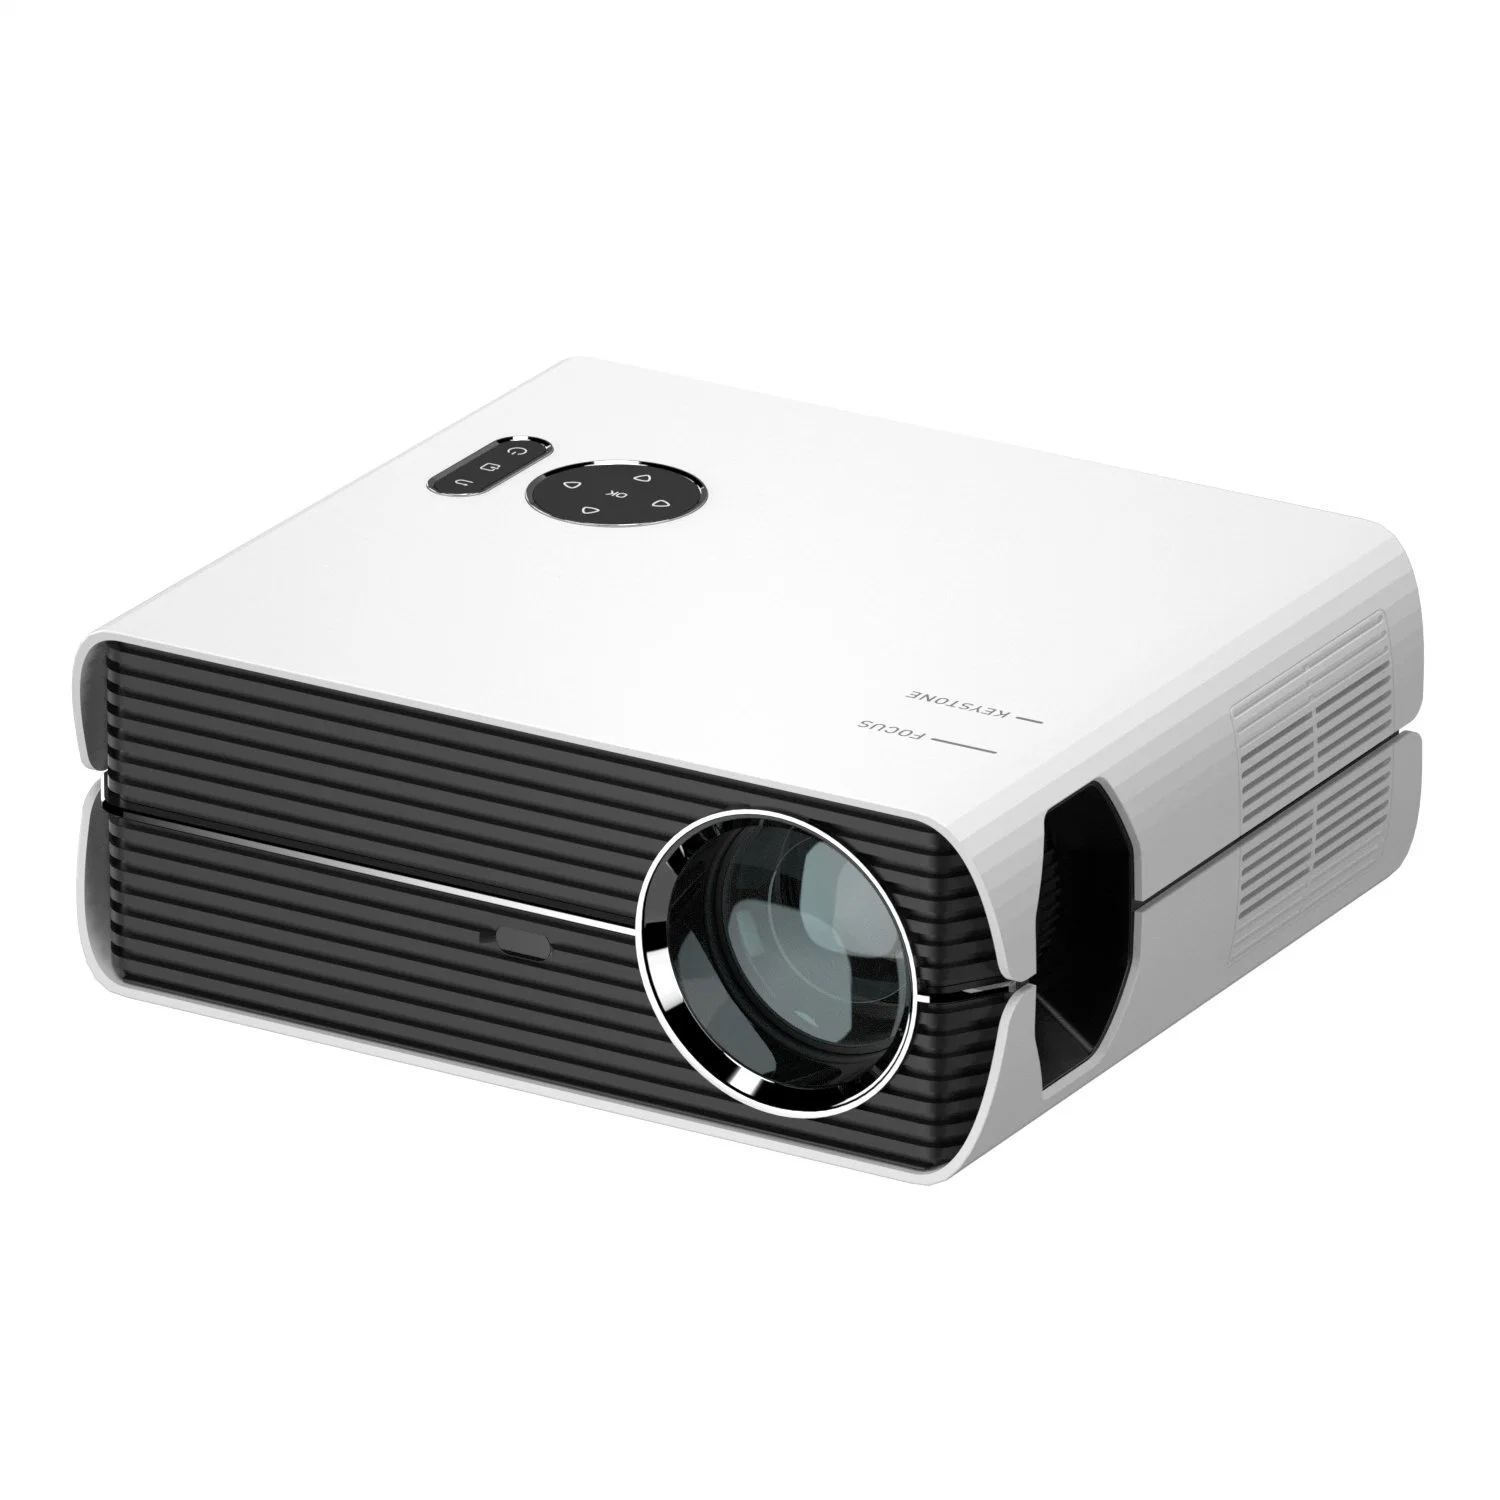 Full HD High Brightness School Business Home Theater Mini Android 9.0 Projector